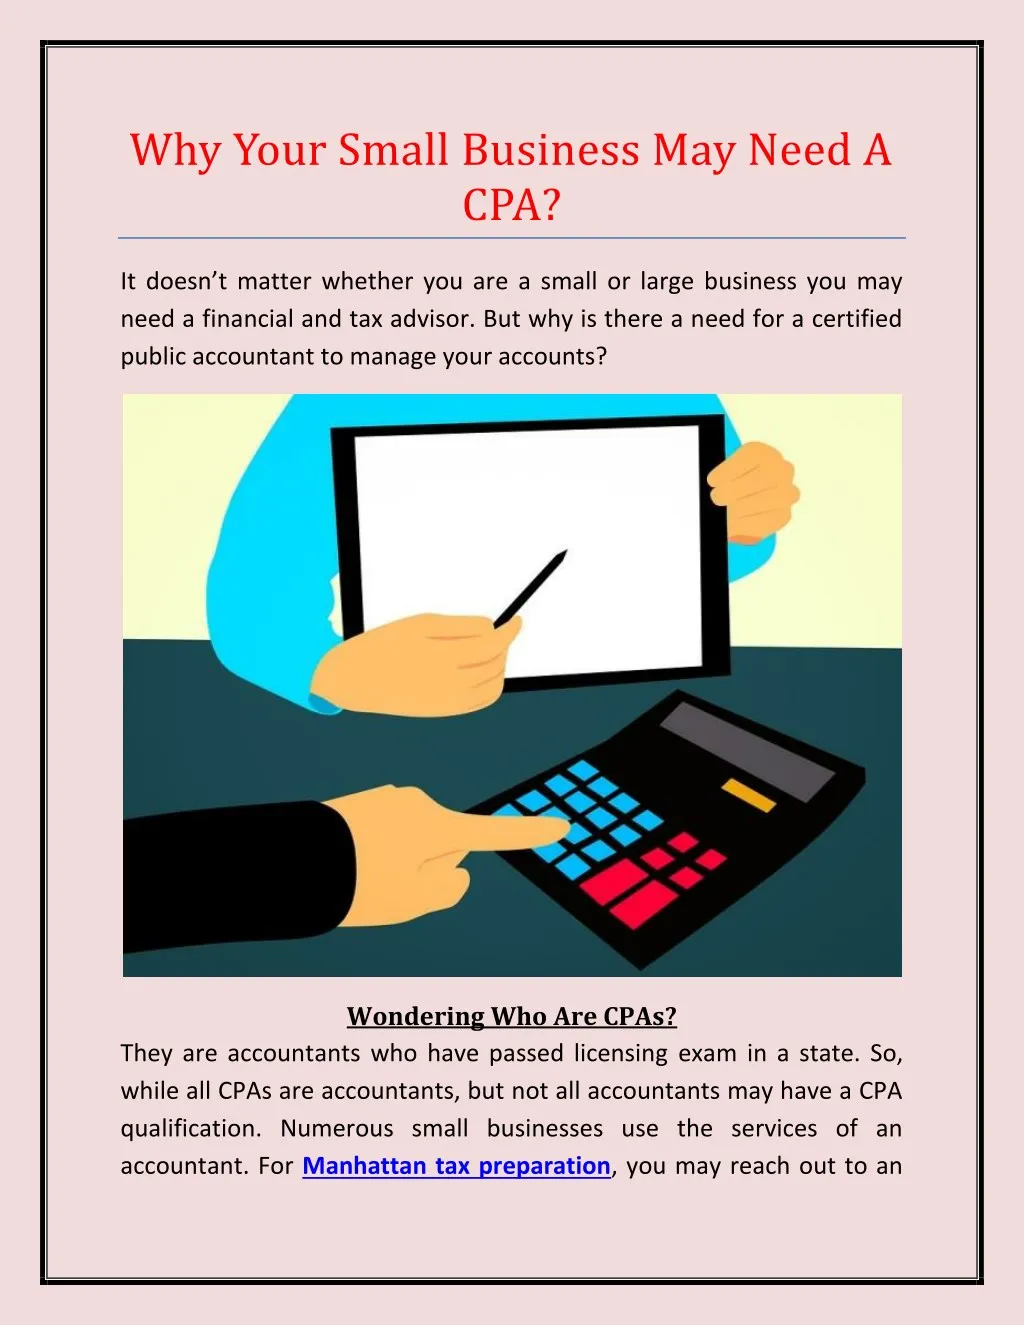 why your small business may need a cpa